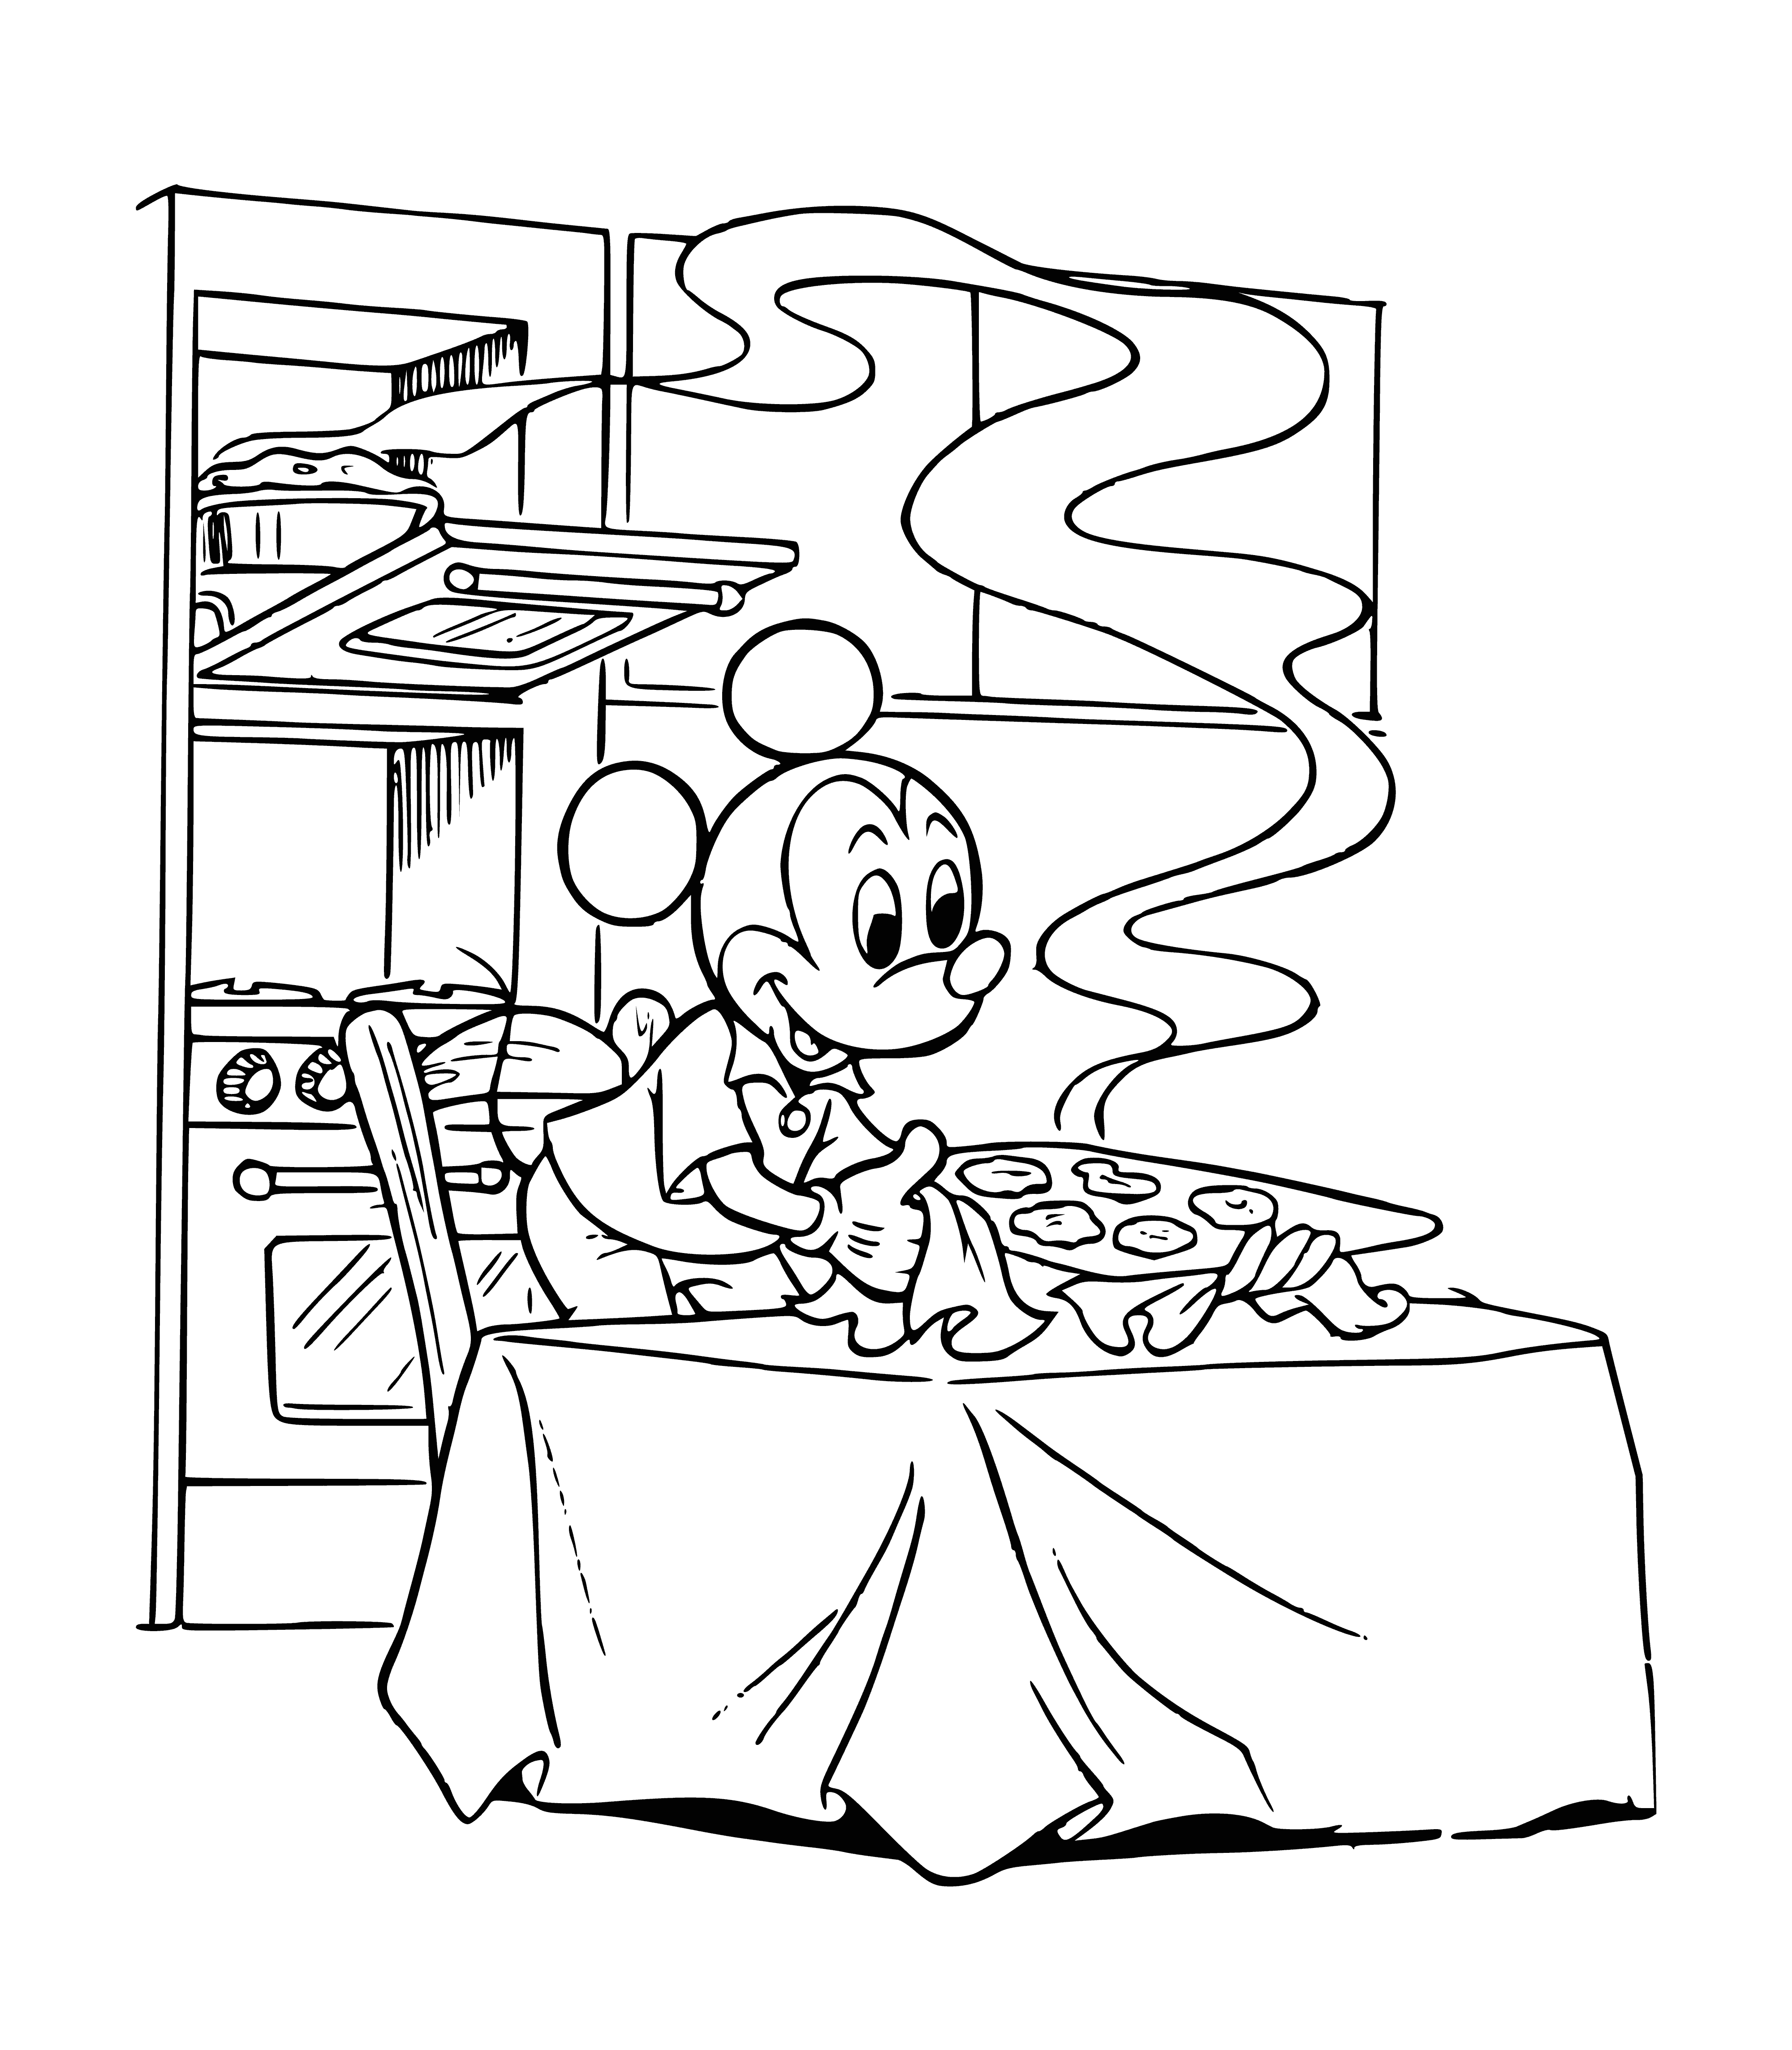 The dish is ready coloring page